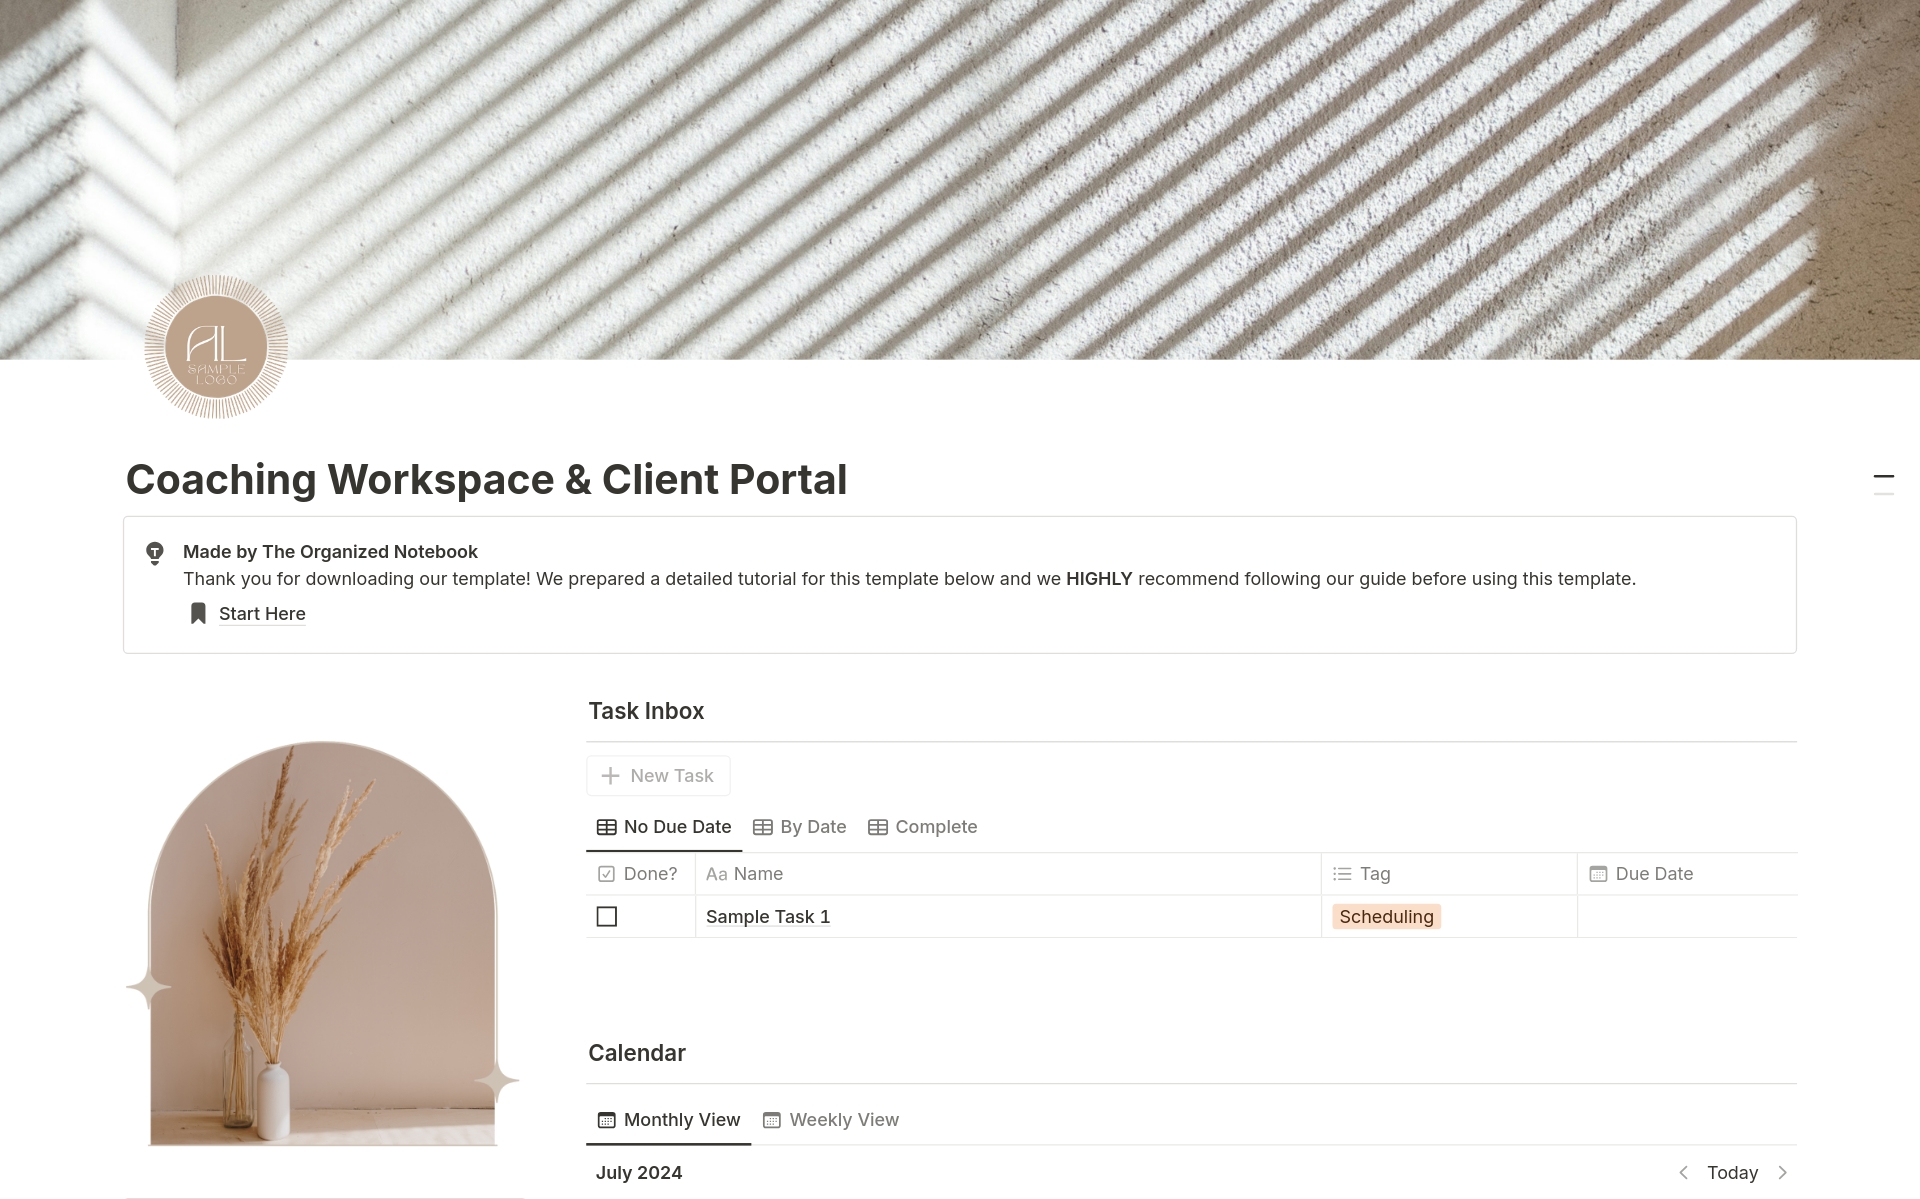 Our Coaching Client Portal & Workspace provides an all-in-one solution for your coaching business. It helps manage all aspects of your clients, track coaching schedules, create tasks, take notes, and store resources. 